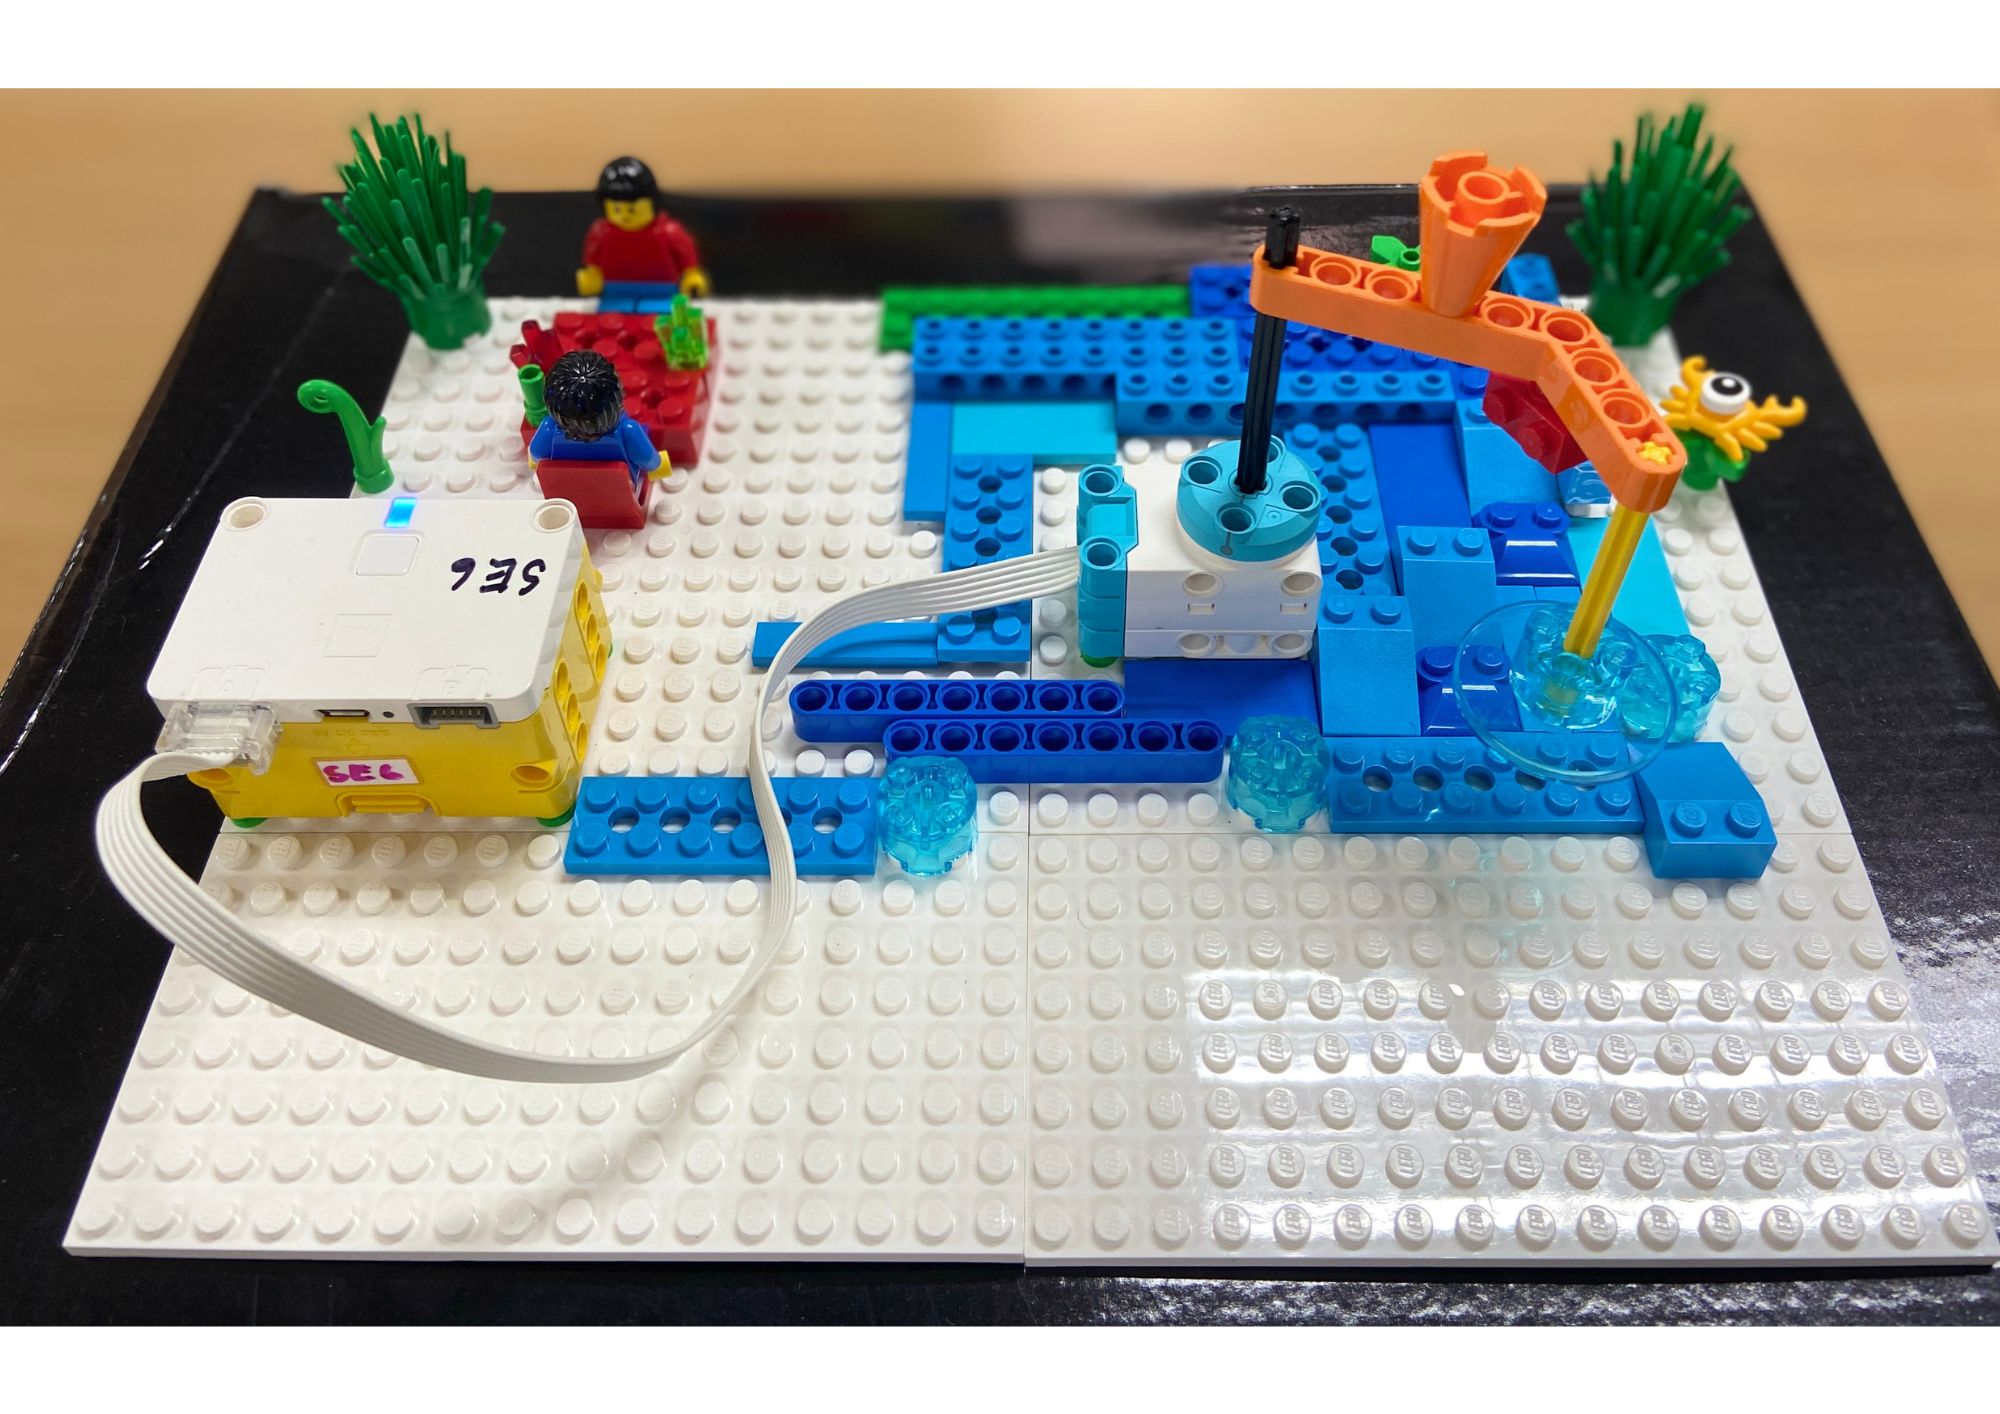 Grade 2 Creates Models Using Lego Spike Essentials to Address Water Issues